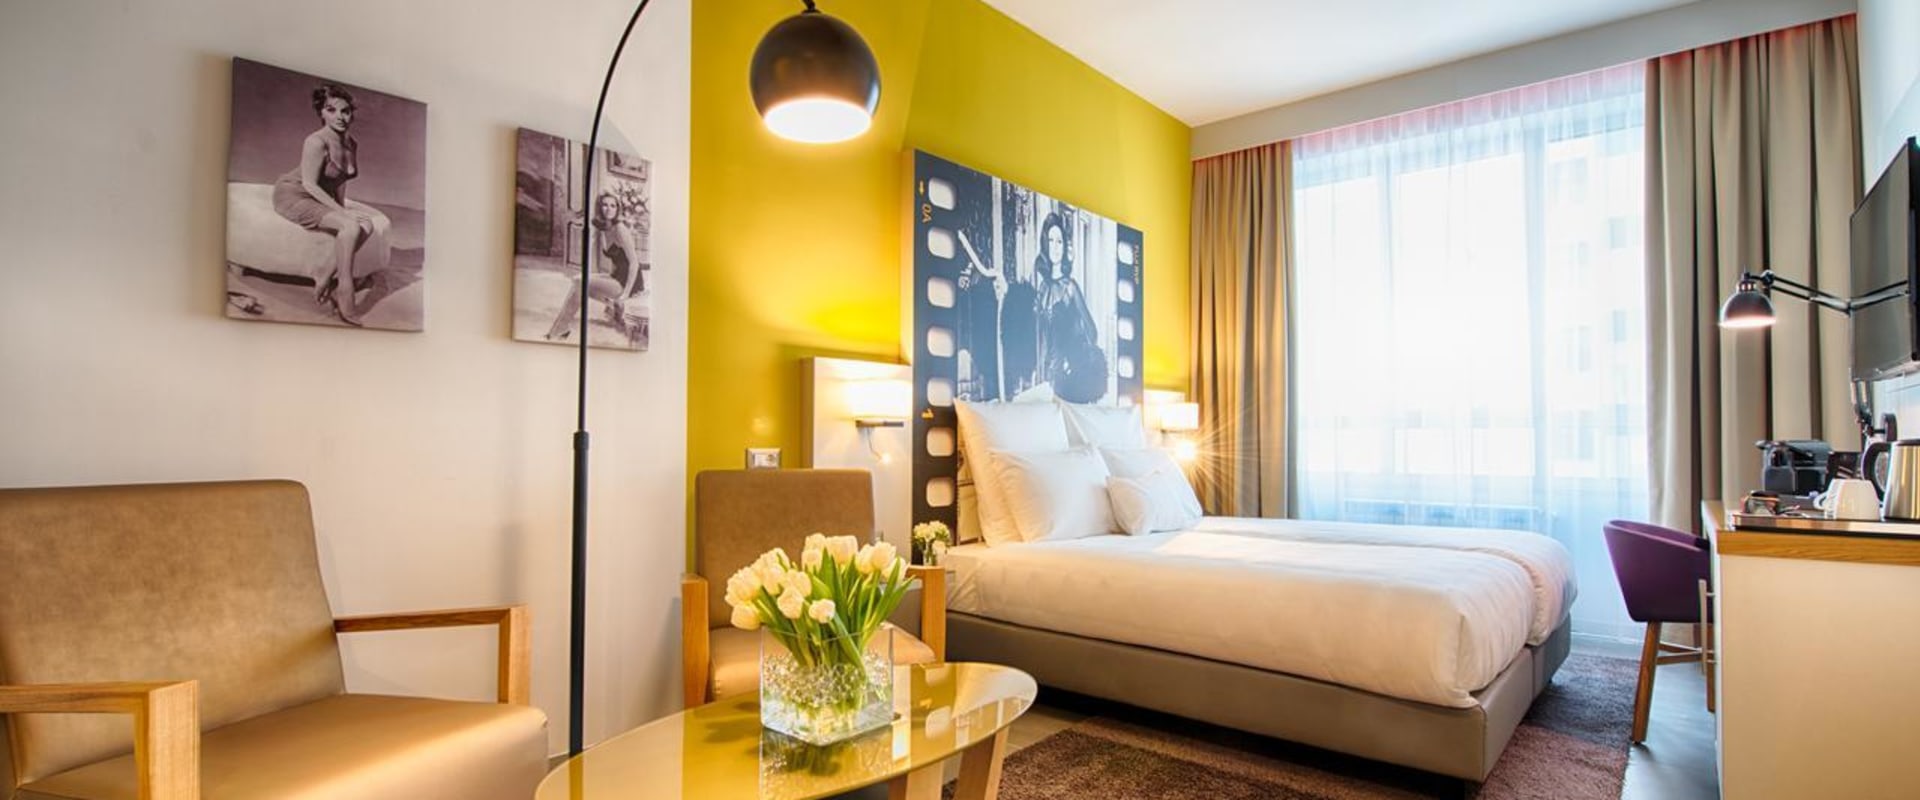 The Best Budget-Friendly Hotels in Milan